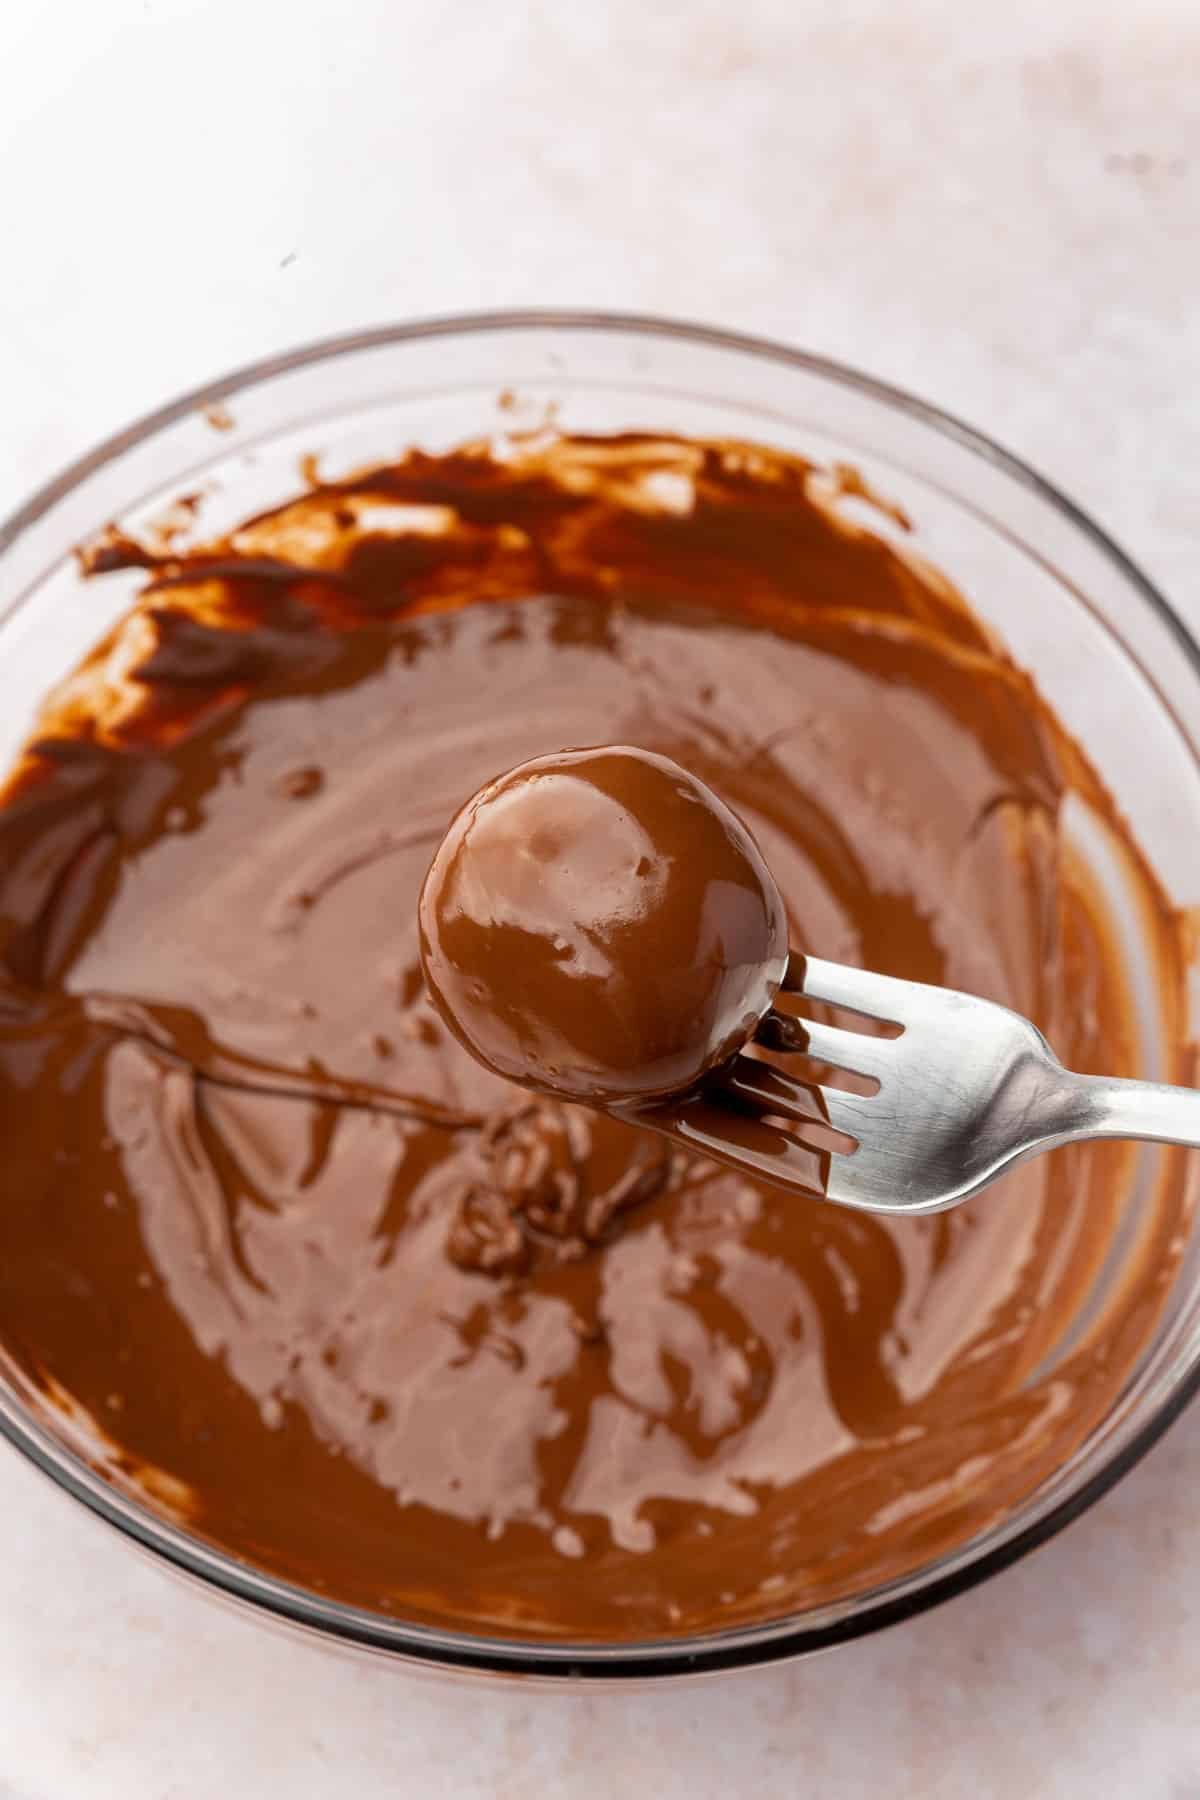 A coconut ball that has been dipped into a bowl of melted dark chocolate and pulled up with a fork.